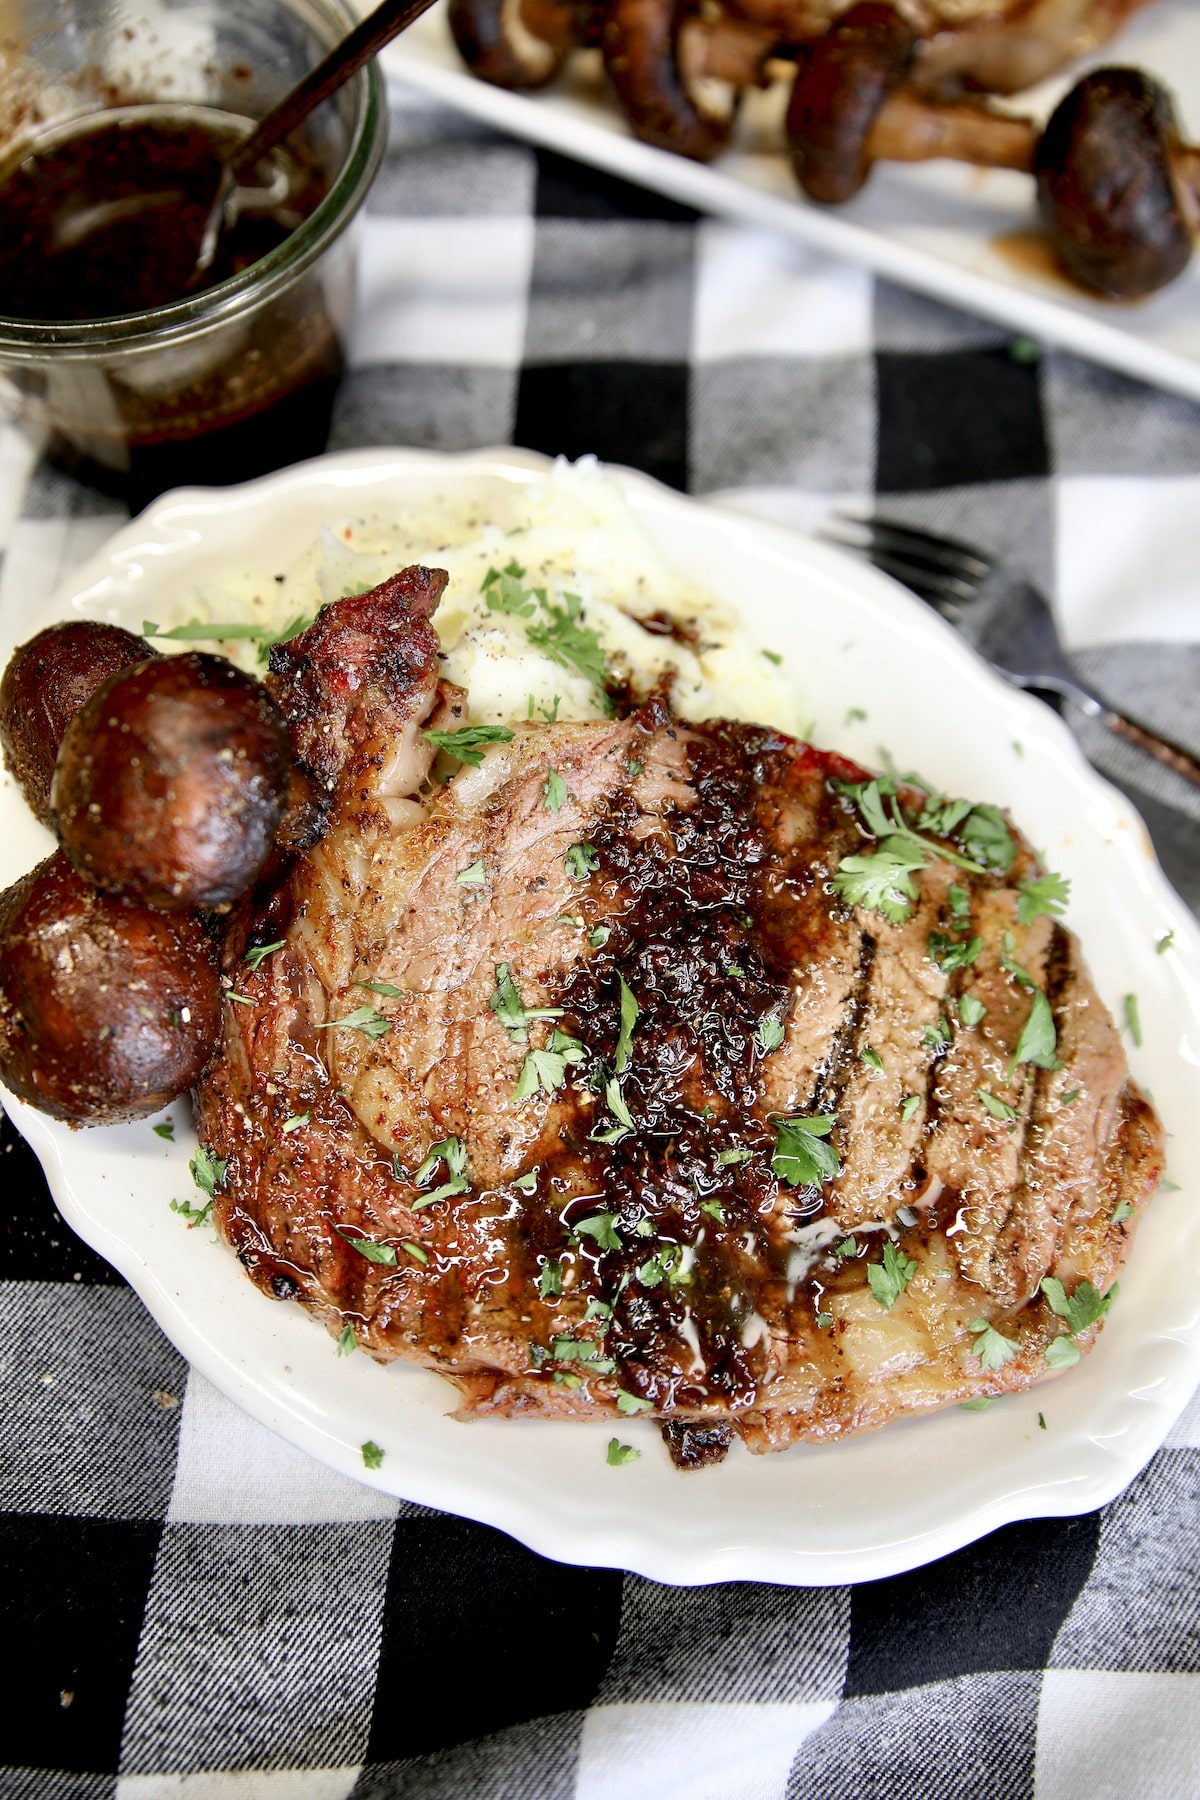 Plate of grilled steak with red wine sauce.